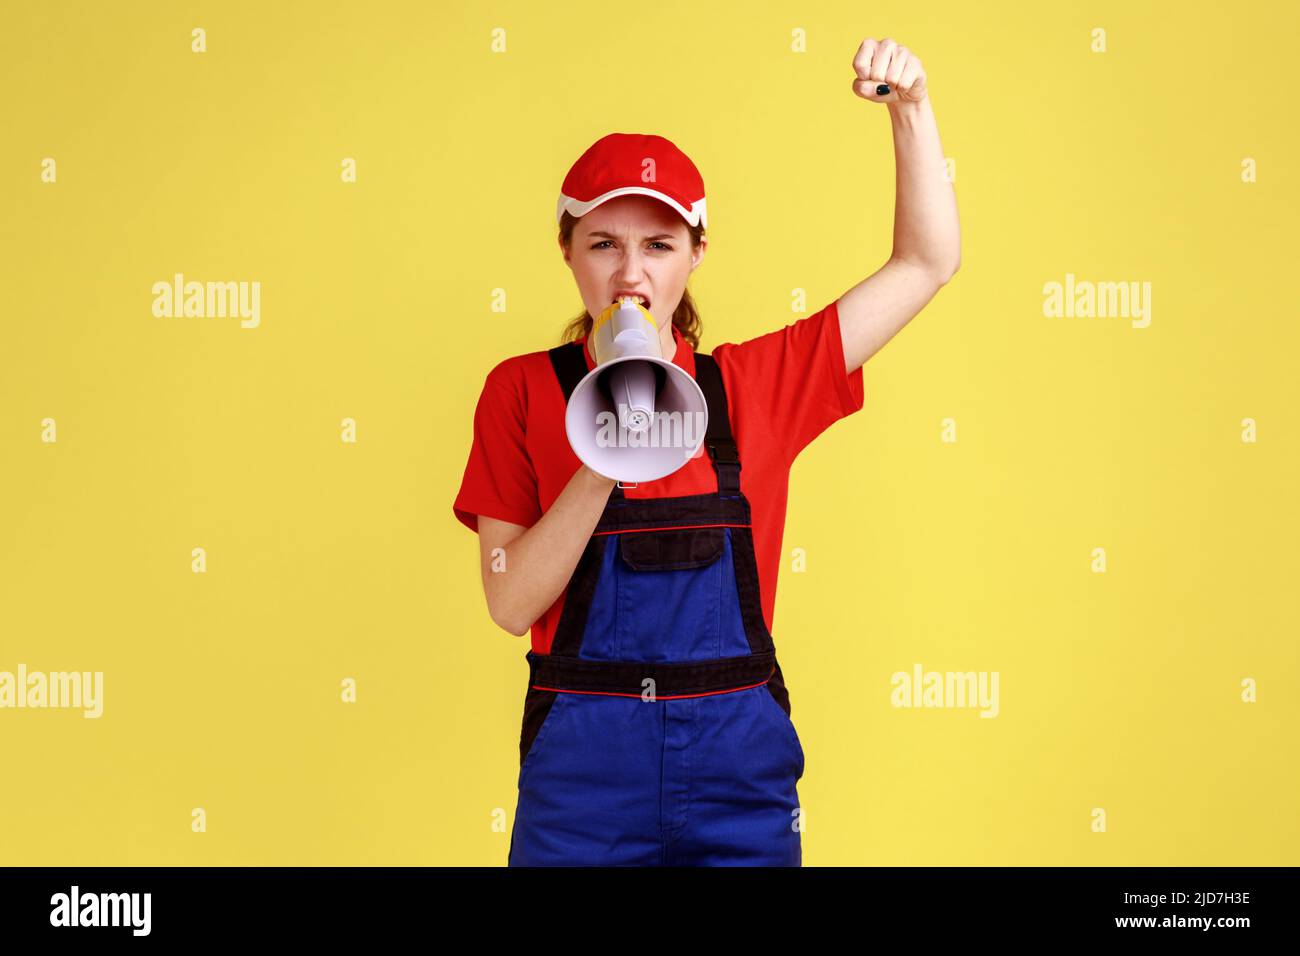 Portrait of aggressive worker woman screaming something with angry facial expression, protesting, raising fist up, wearing overalls and red cap. Indoor studio shot isolated on yellow background. Stock Photo